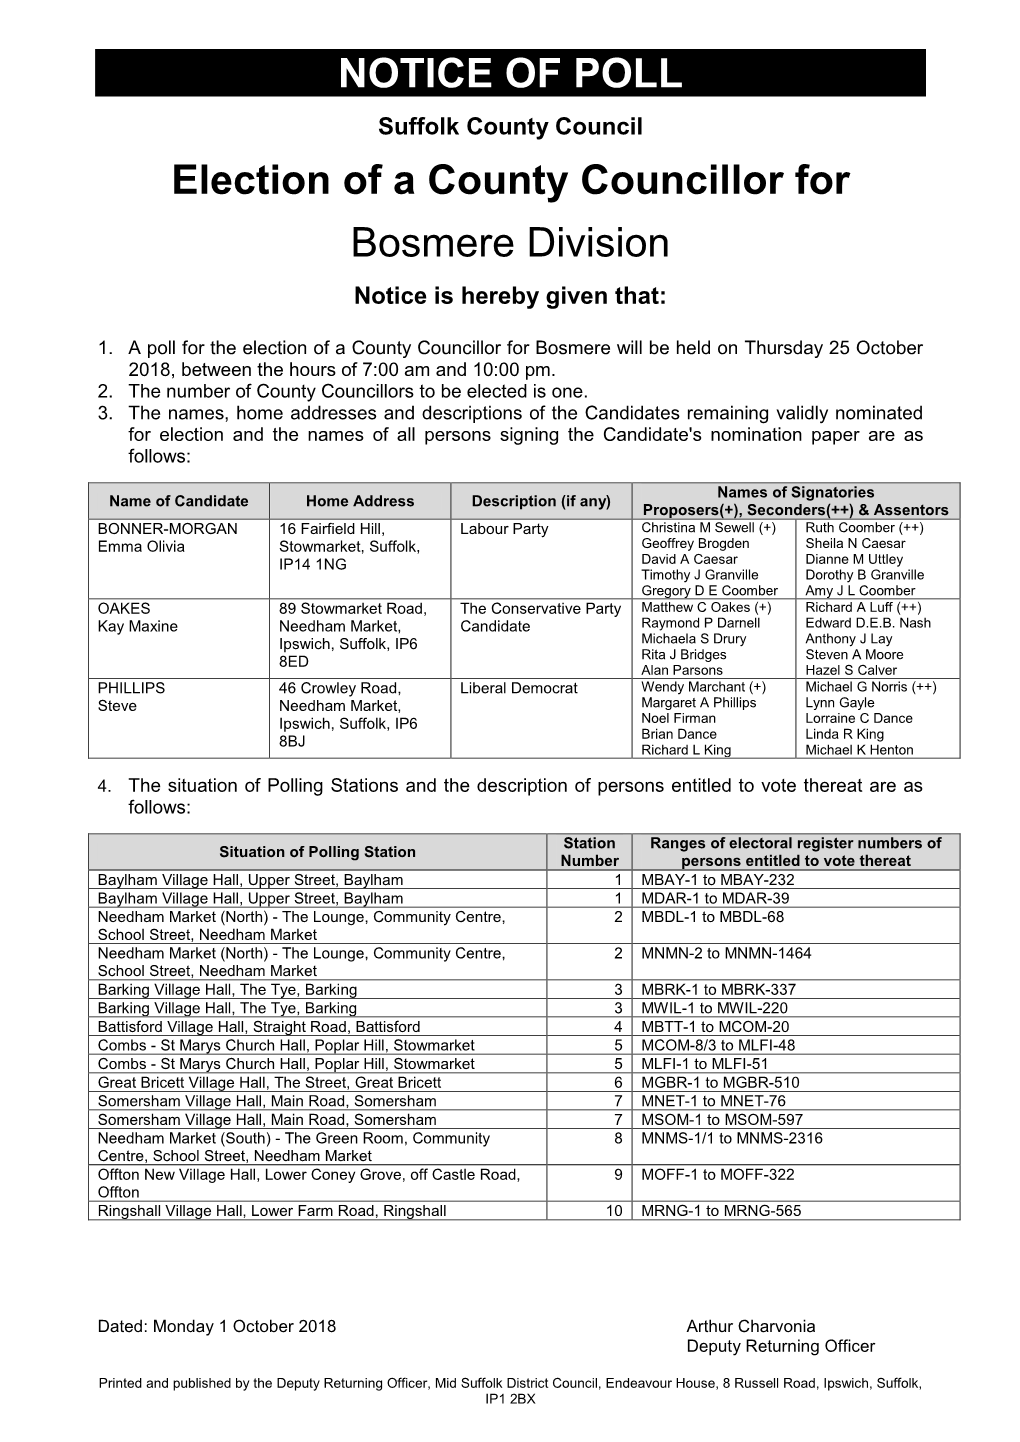 NOTICE of POLL Election of a County Councillor for Bosmere